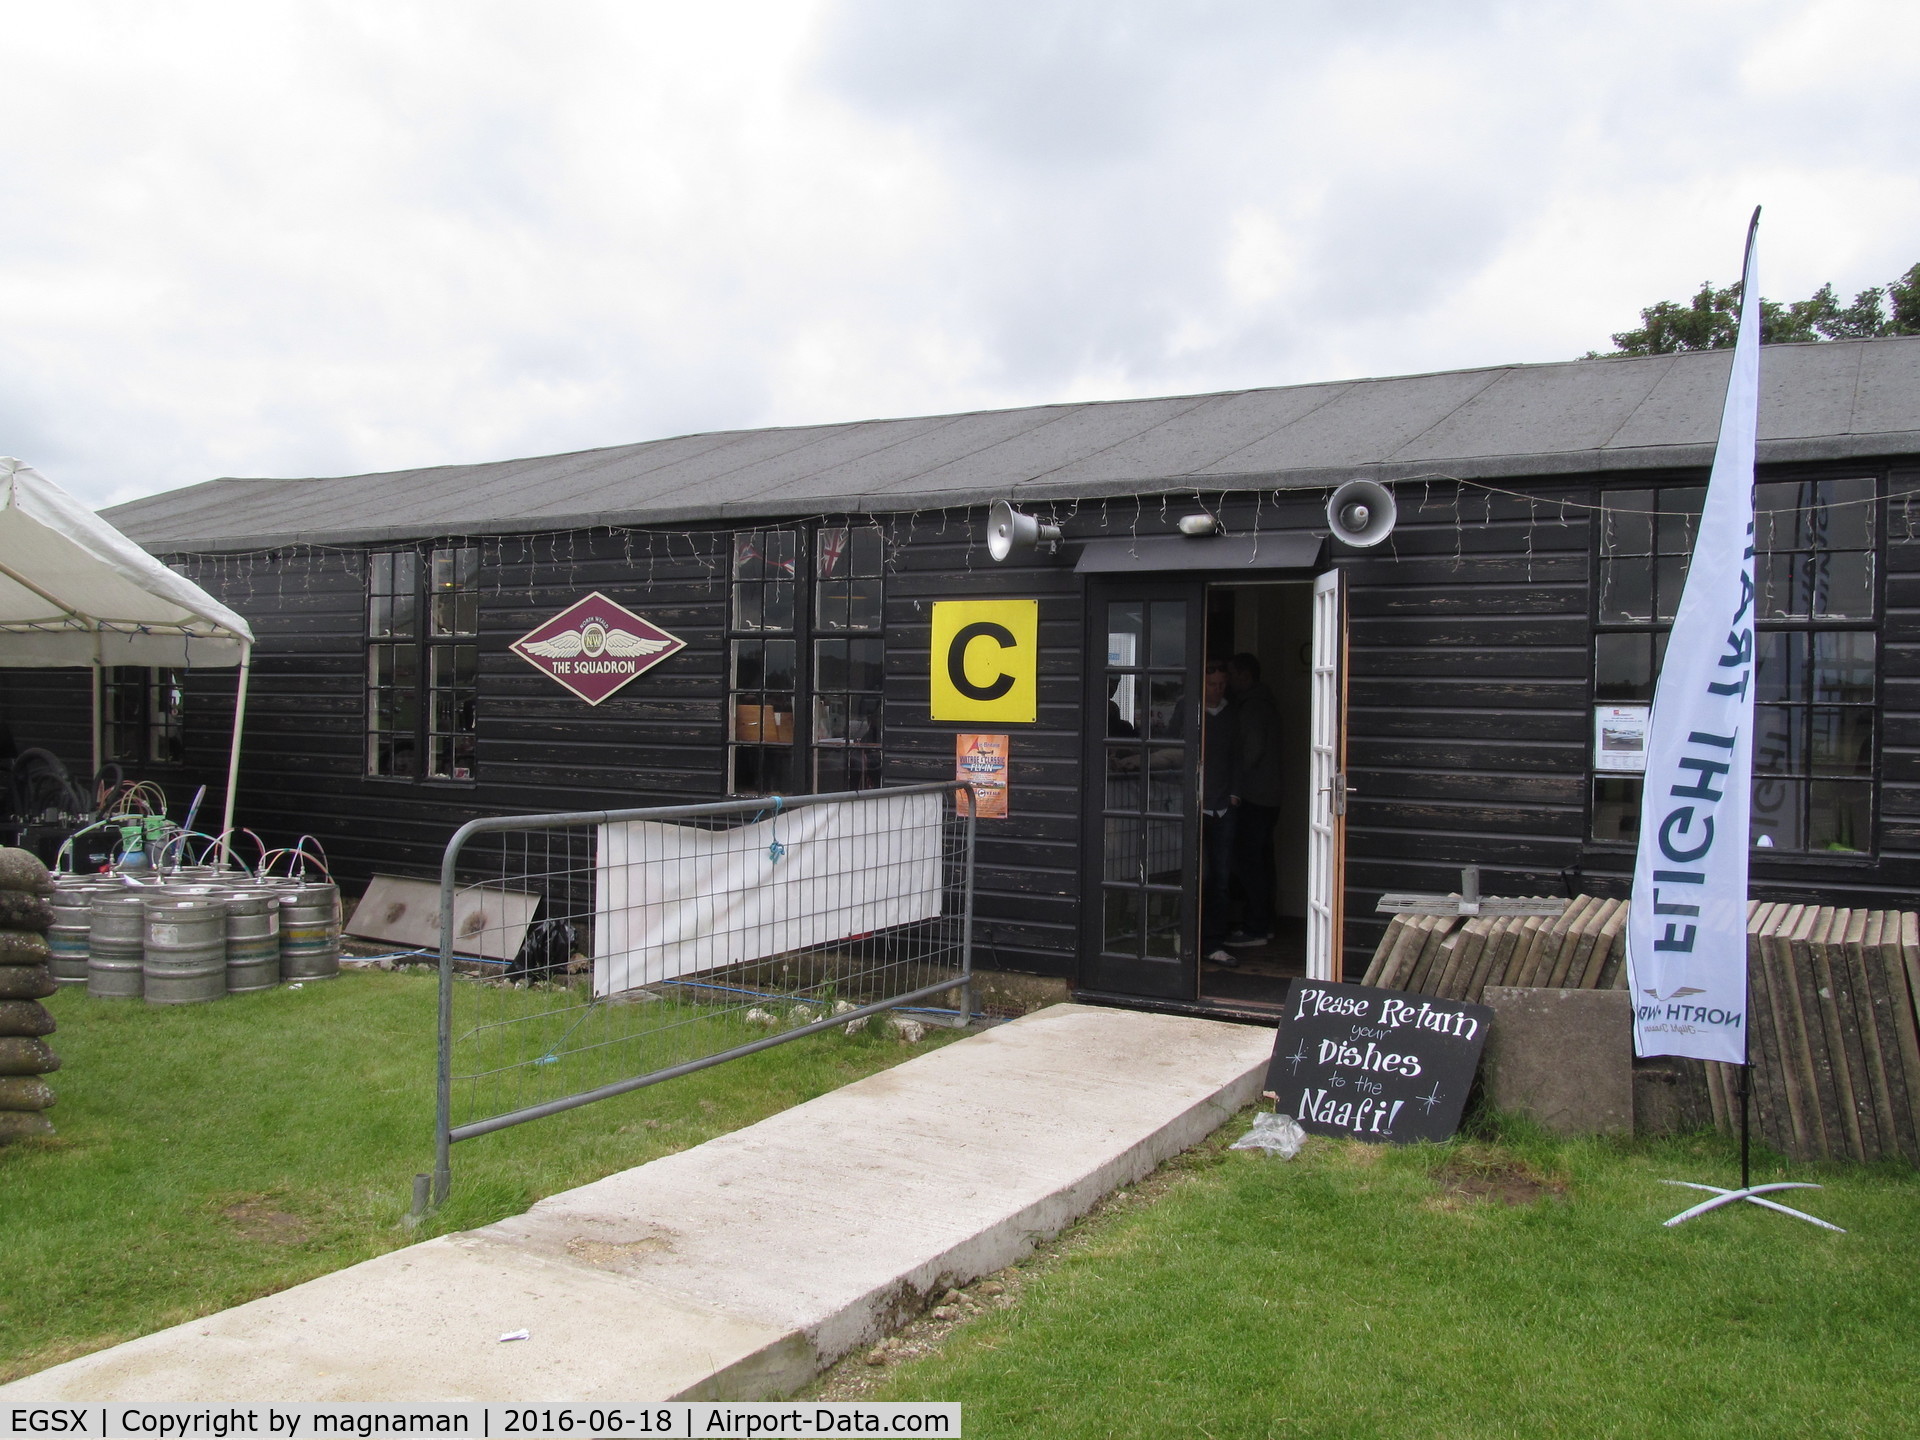 North Weald Airfield Airport, North Weald, England United Kingdom (EGSX) - is that c for café or control?